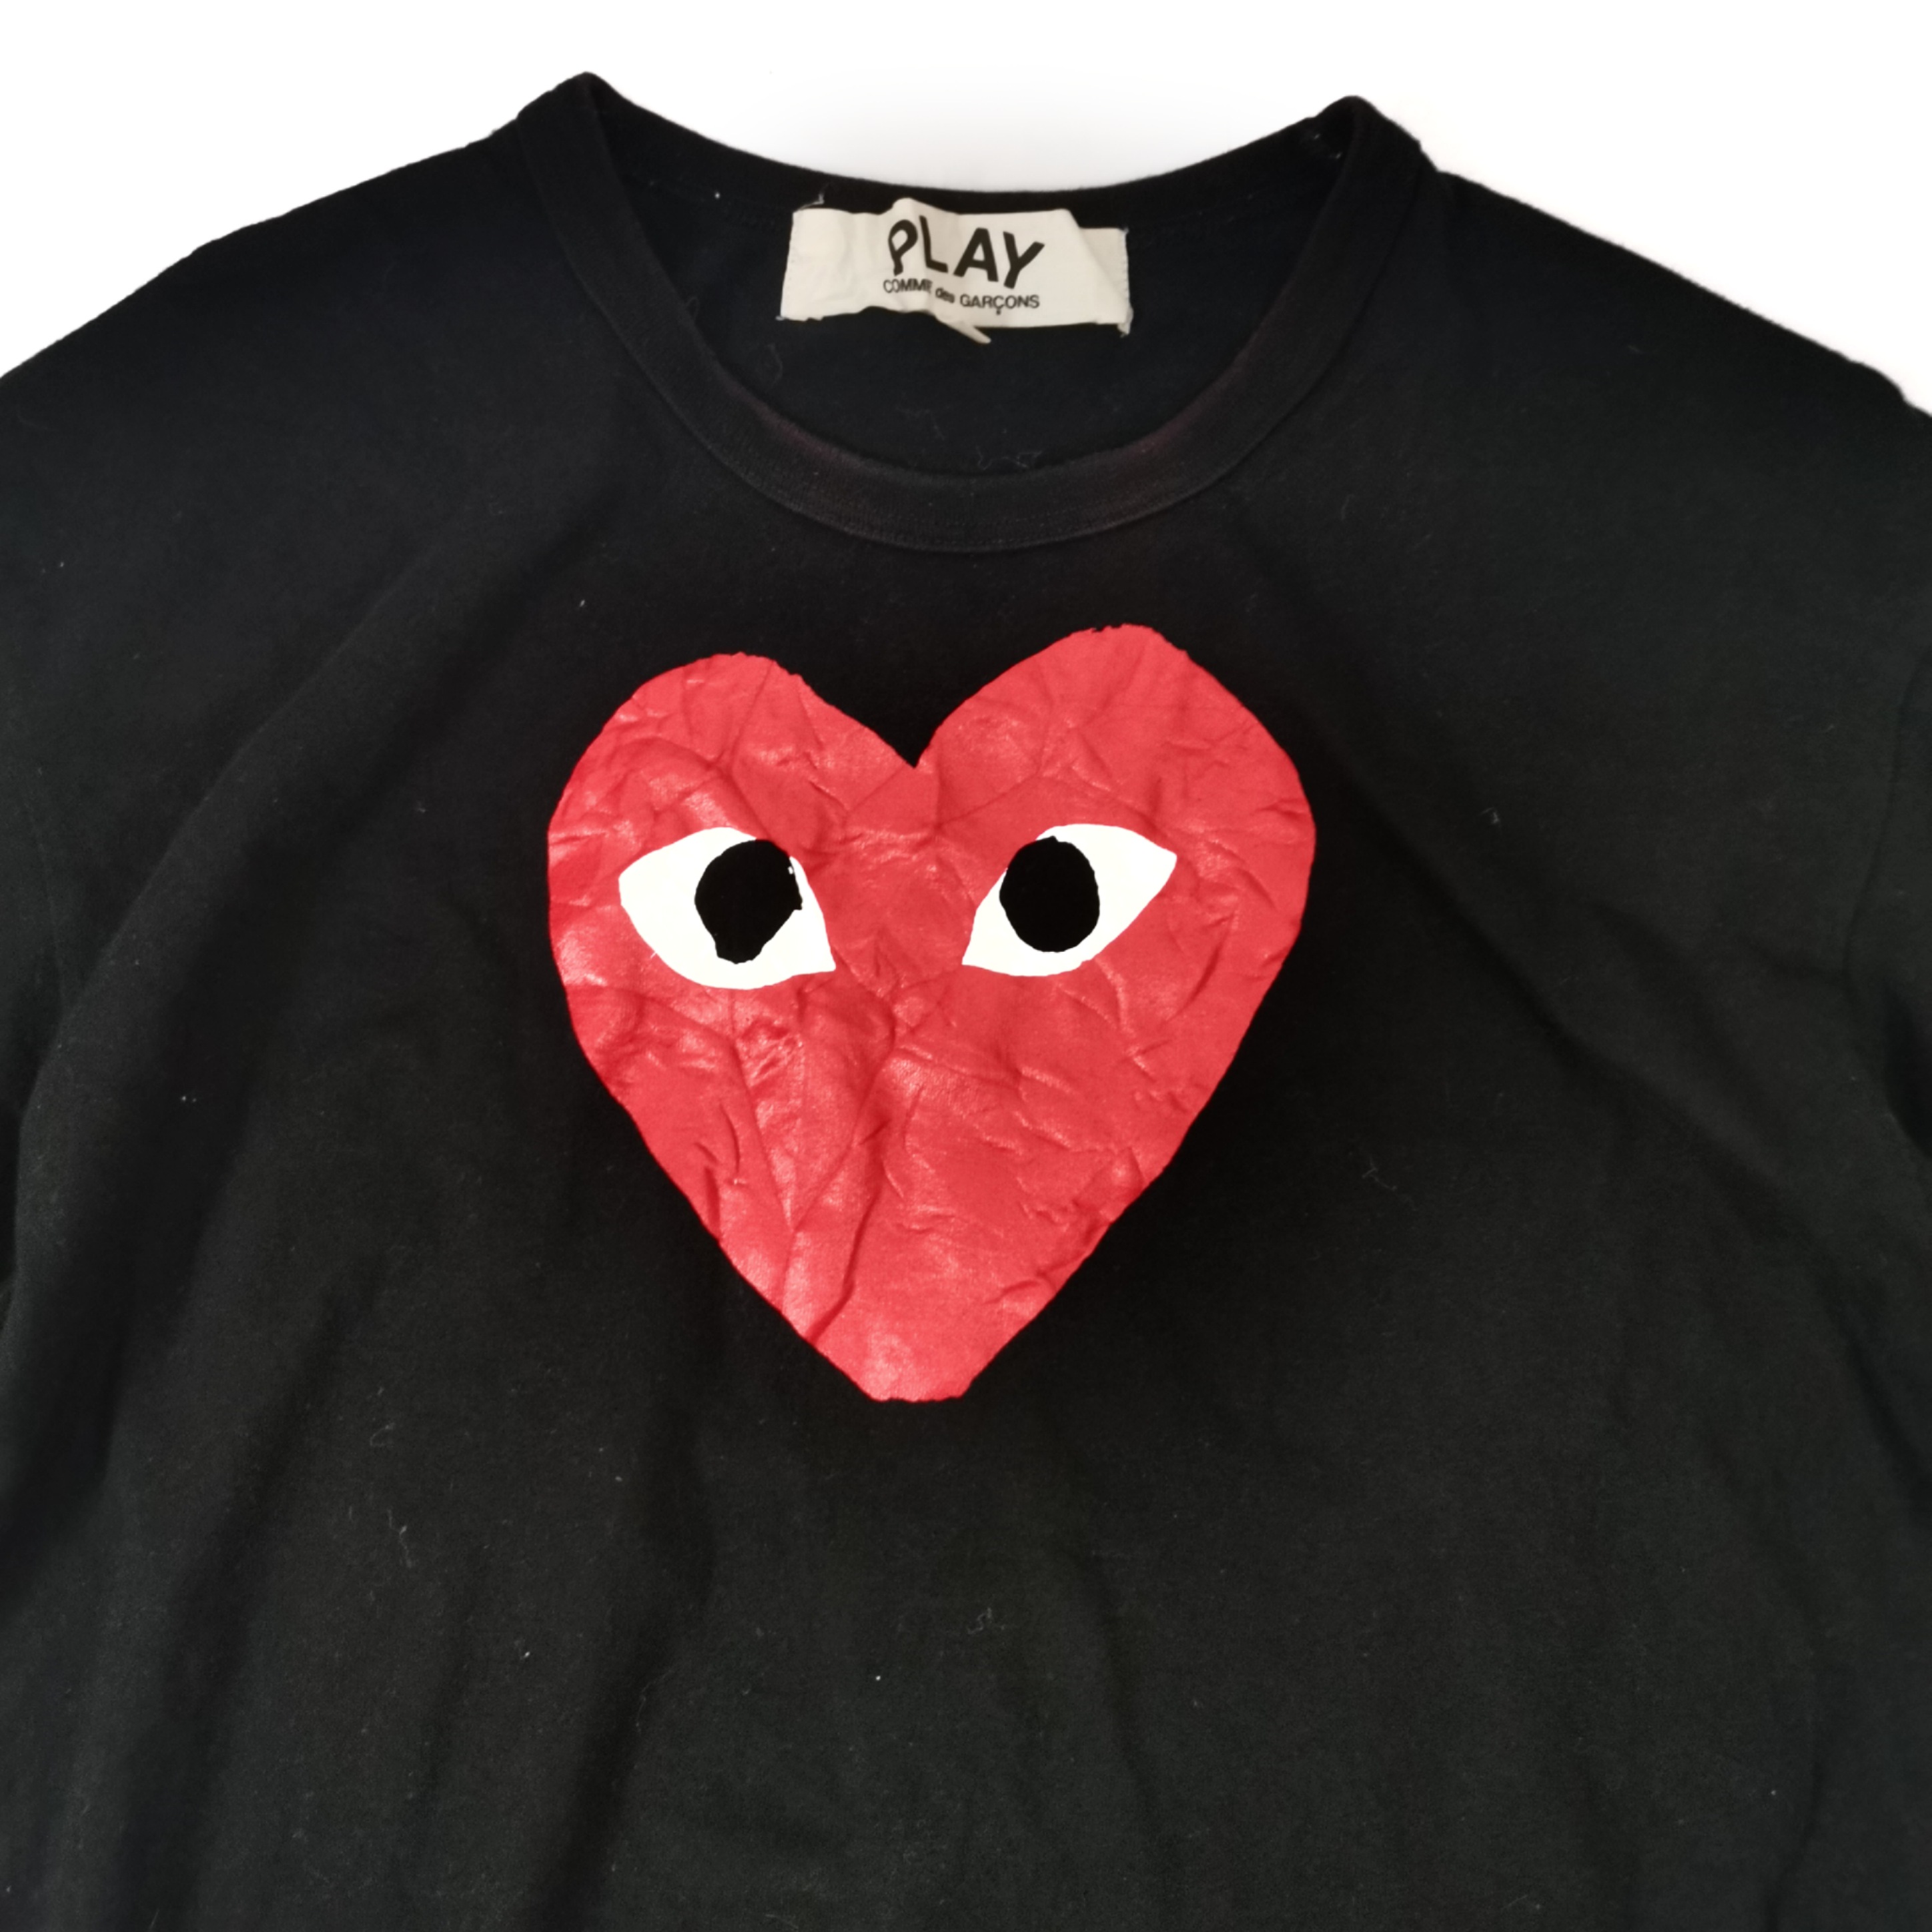 Big Heart Tee by Comme Des Garcon - 2